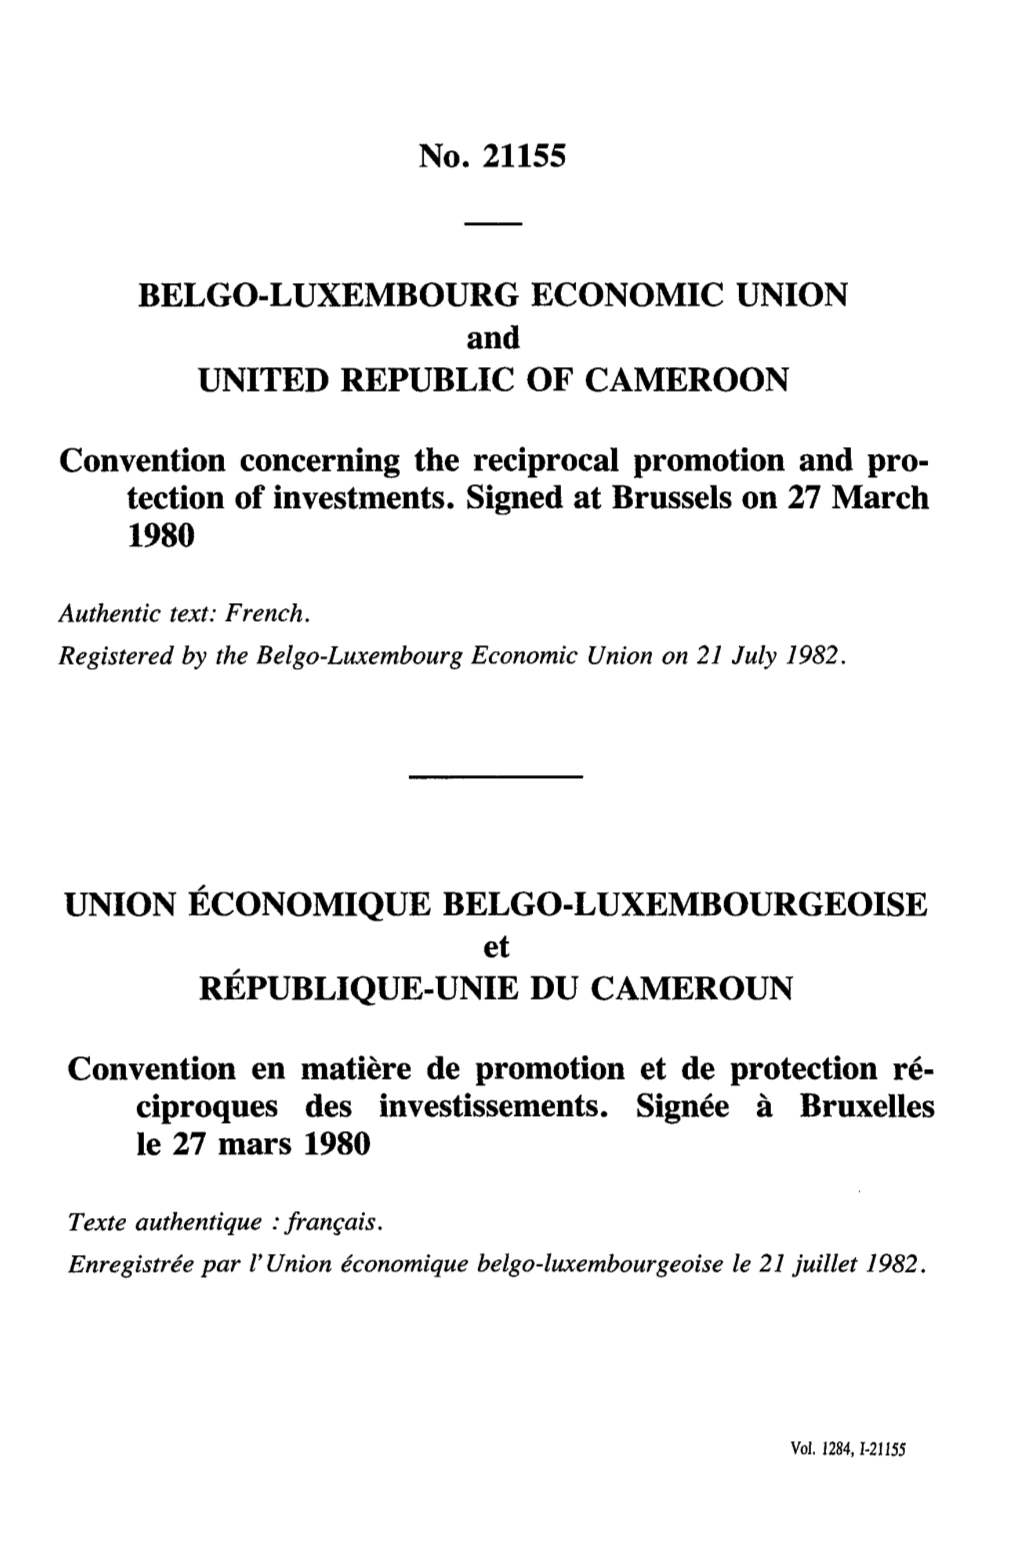 And Convention Concerning the Reciprocal Promotion And